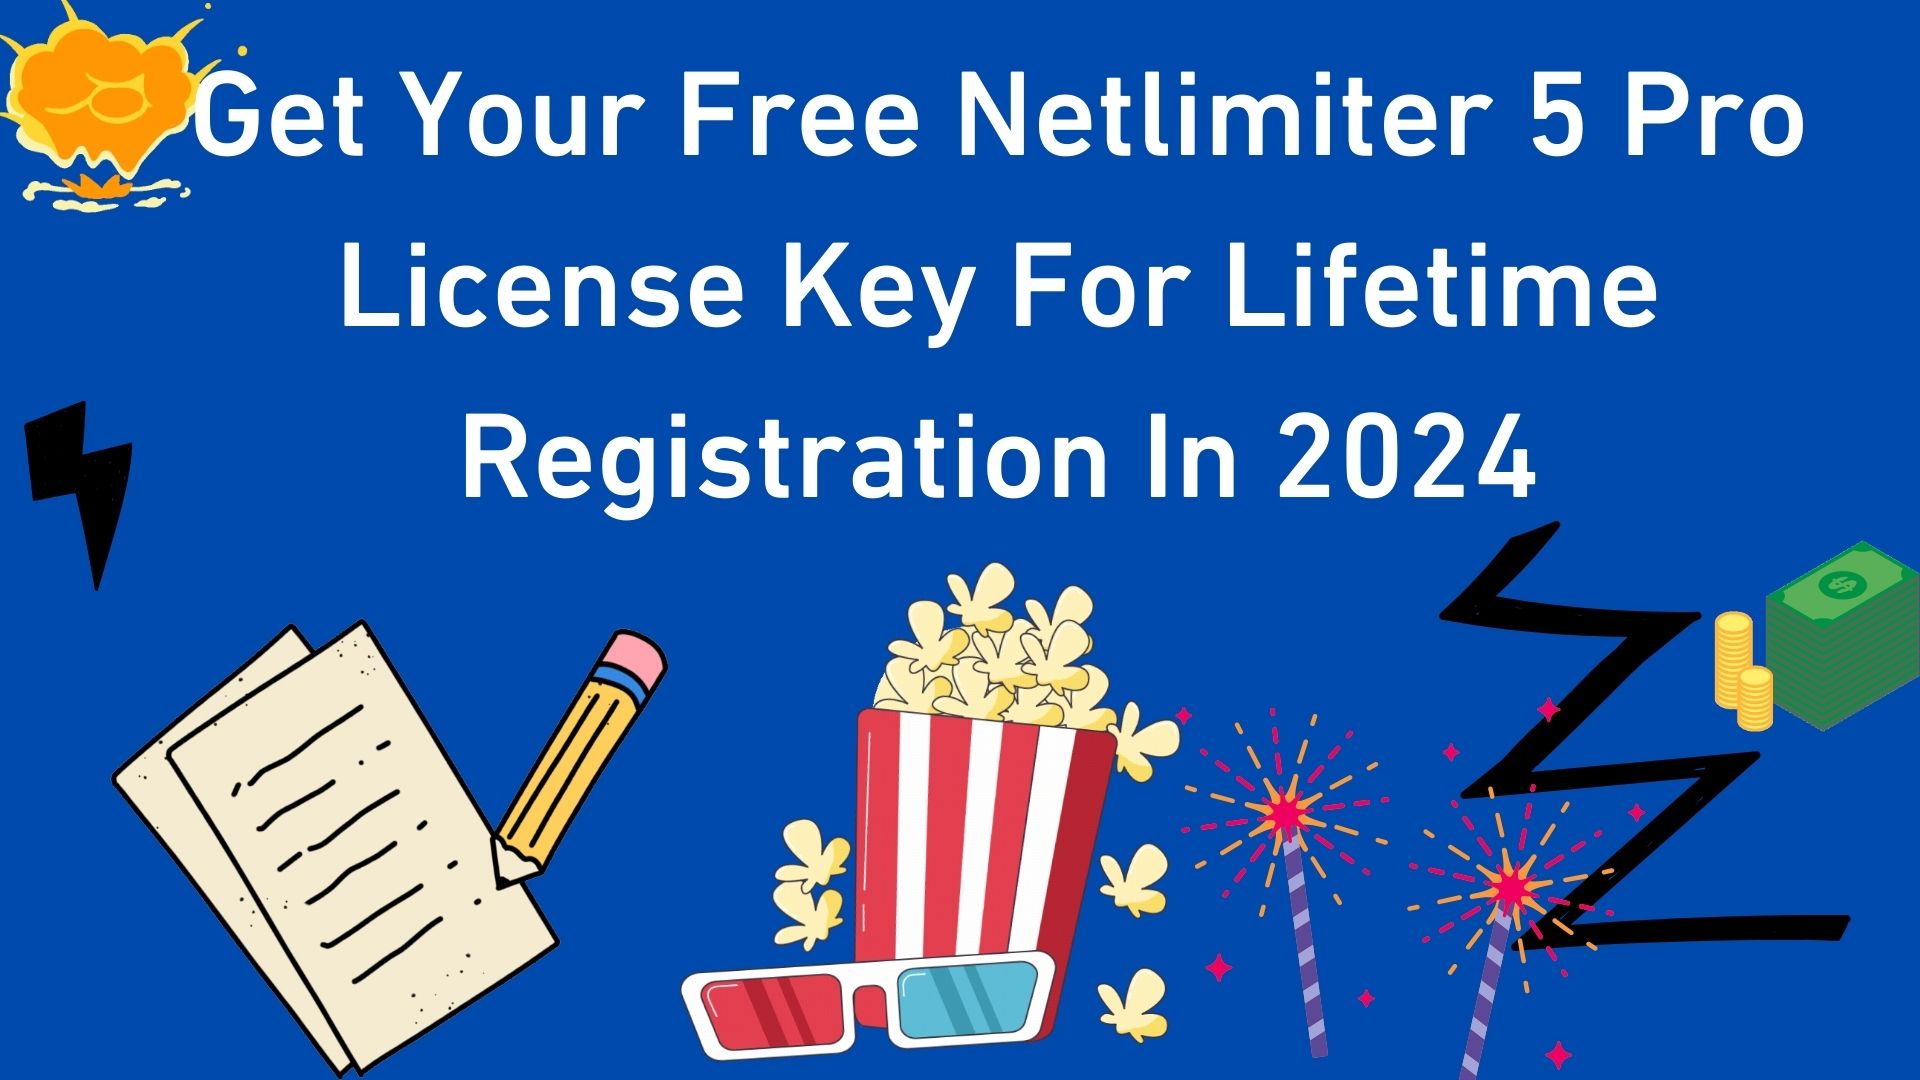 Get Your Free Netlimiter 5 Pro License Key